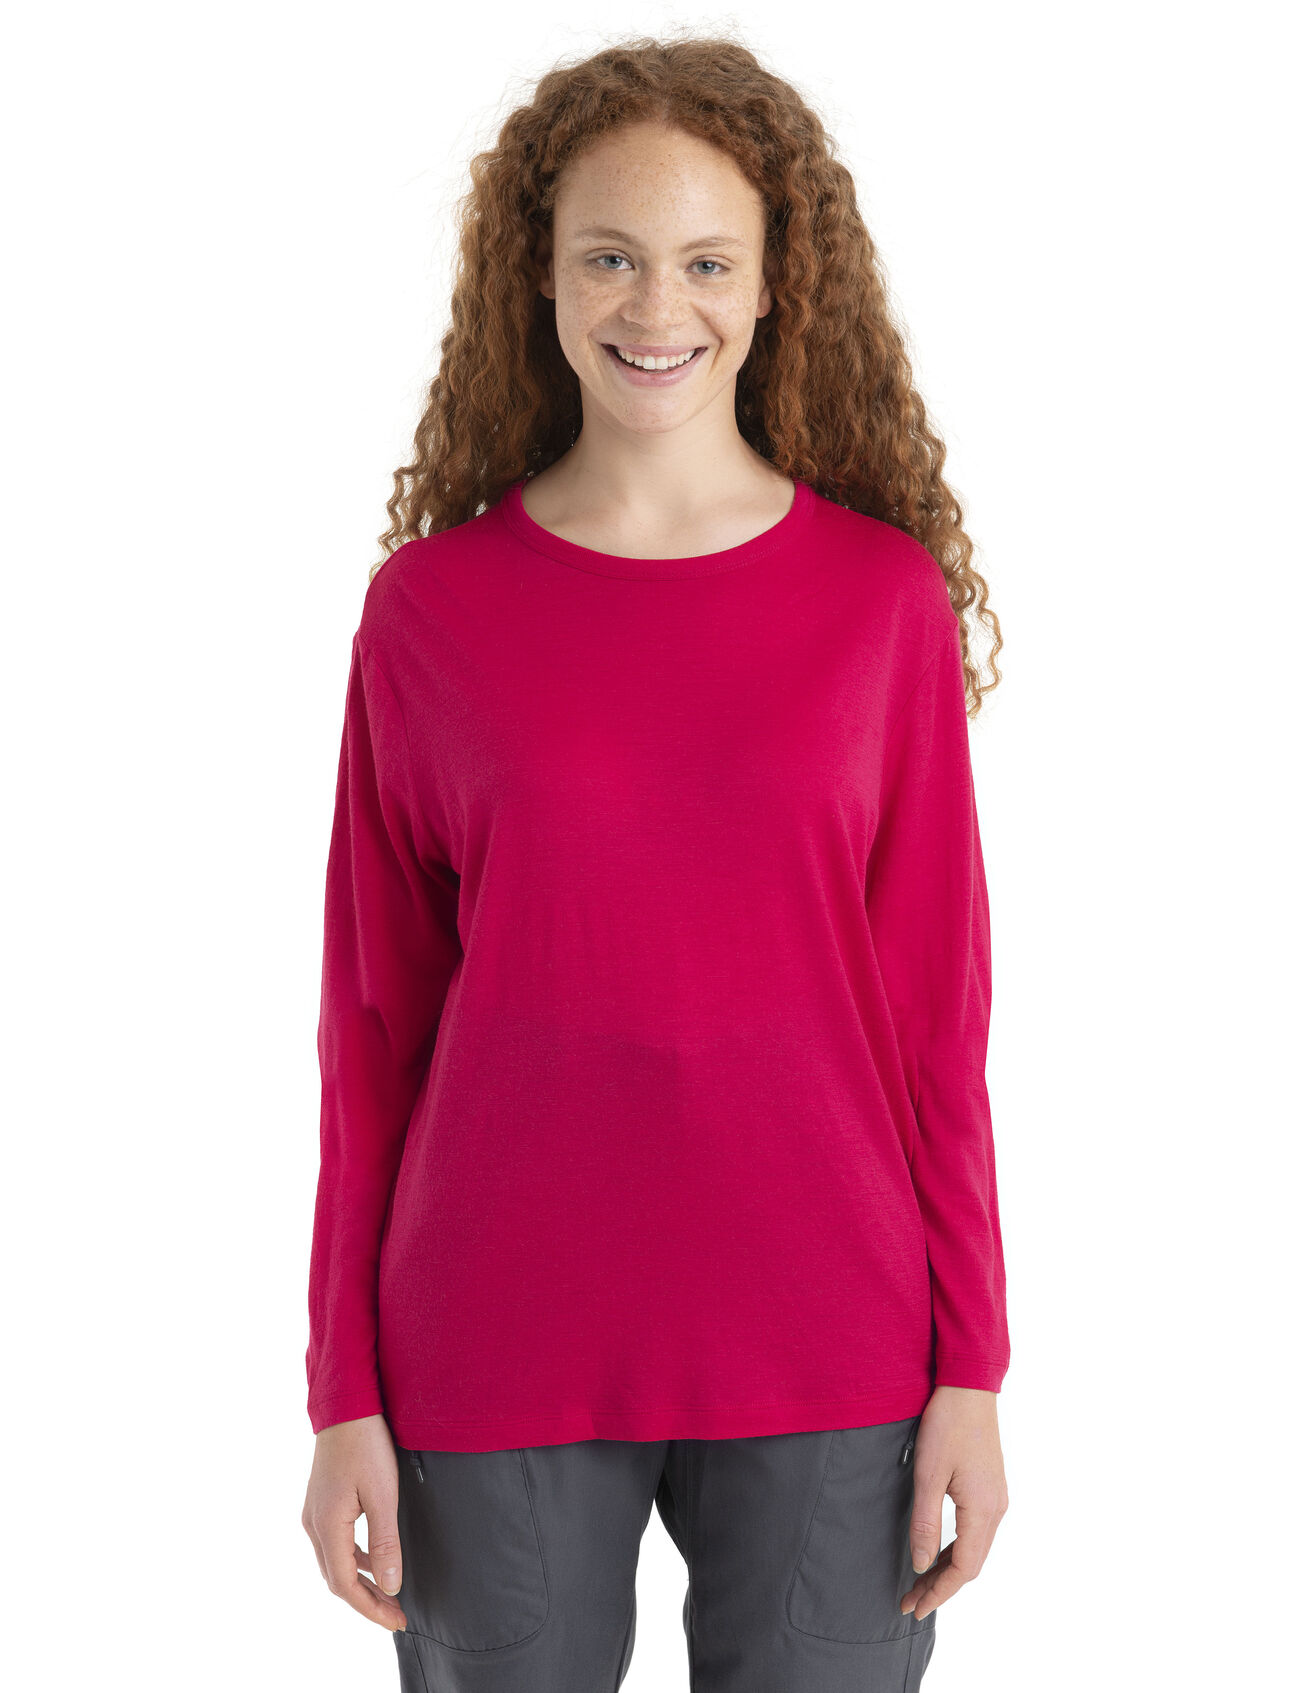 Womens Merino Granary Long Sleeve T-Shirt A classic tee with a relaxed fit and soft, breathable, 100% merino wool fabric, the Granary Long Sleeve Tee is all about everyday comfort and style.